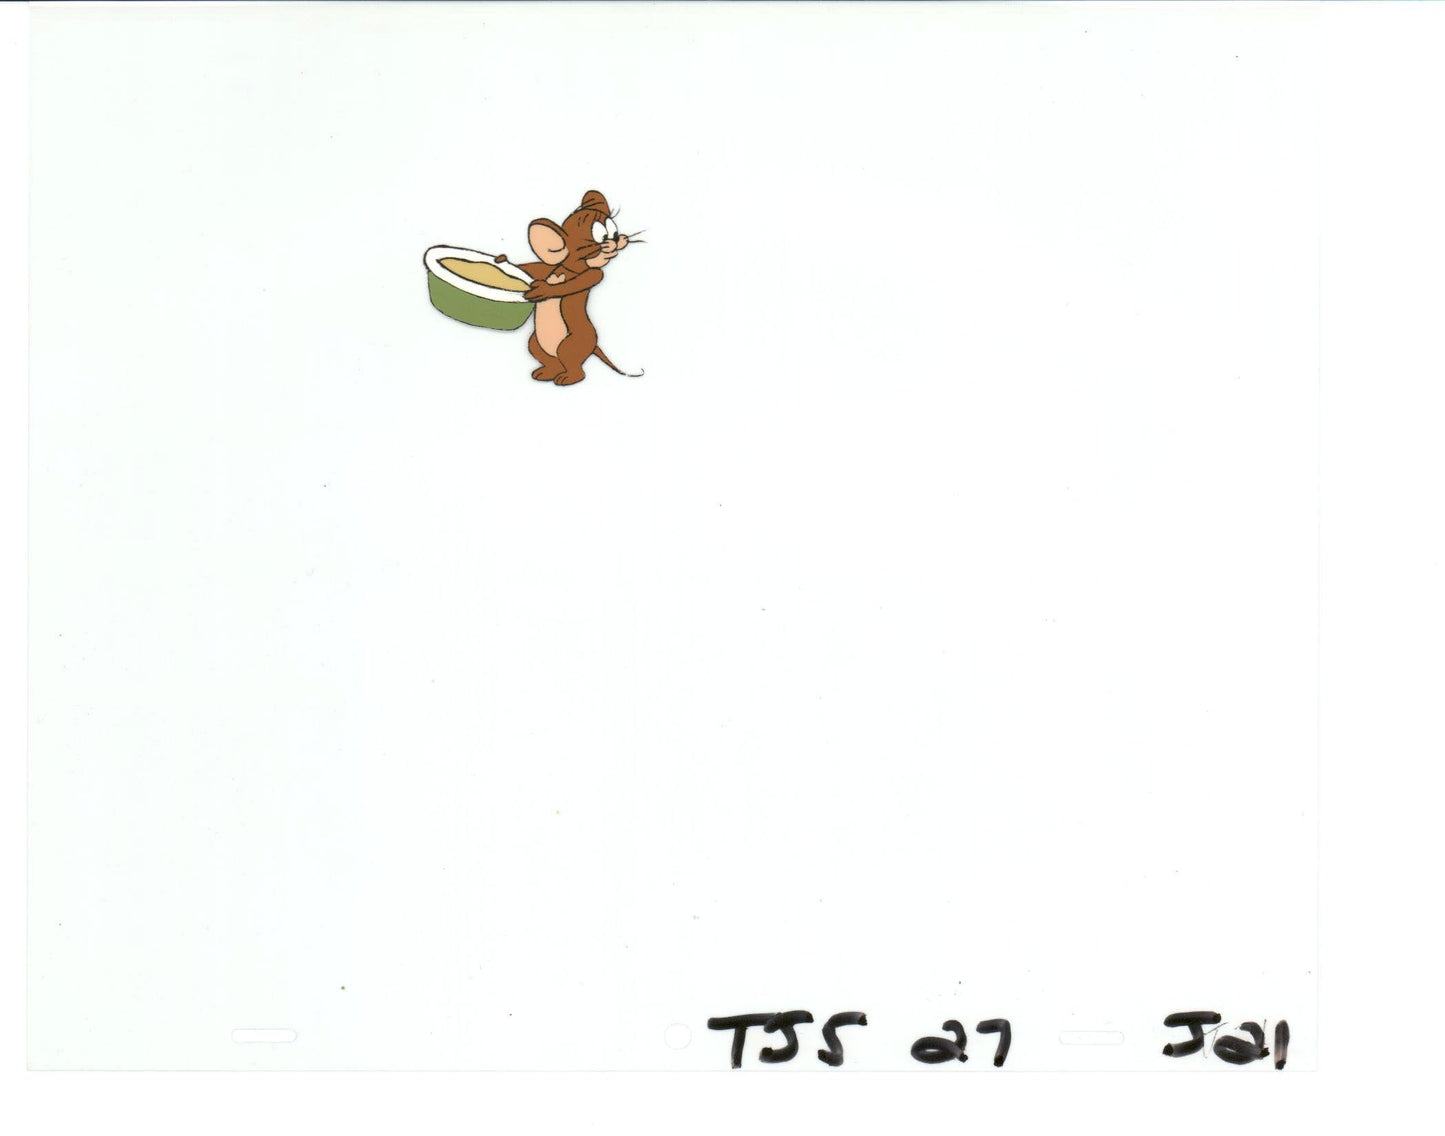 Tom & Jerry Original Production Animation Cel from Filmation 1980-82 b4552